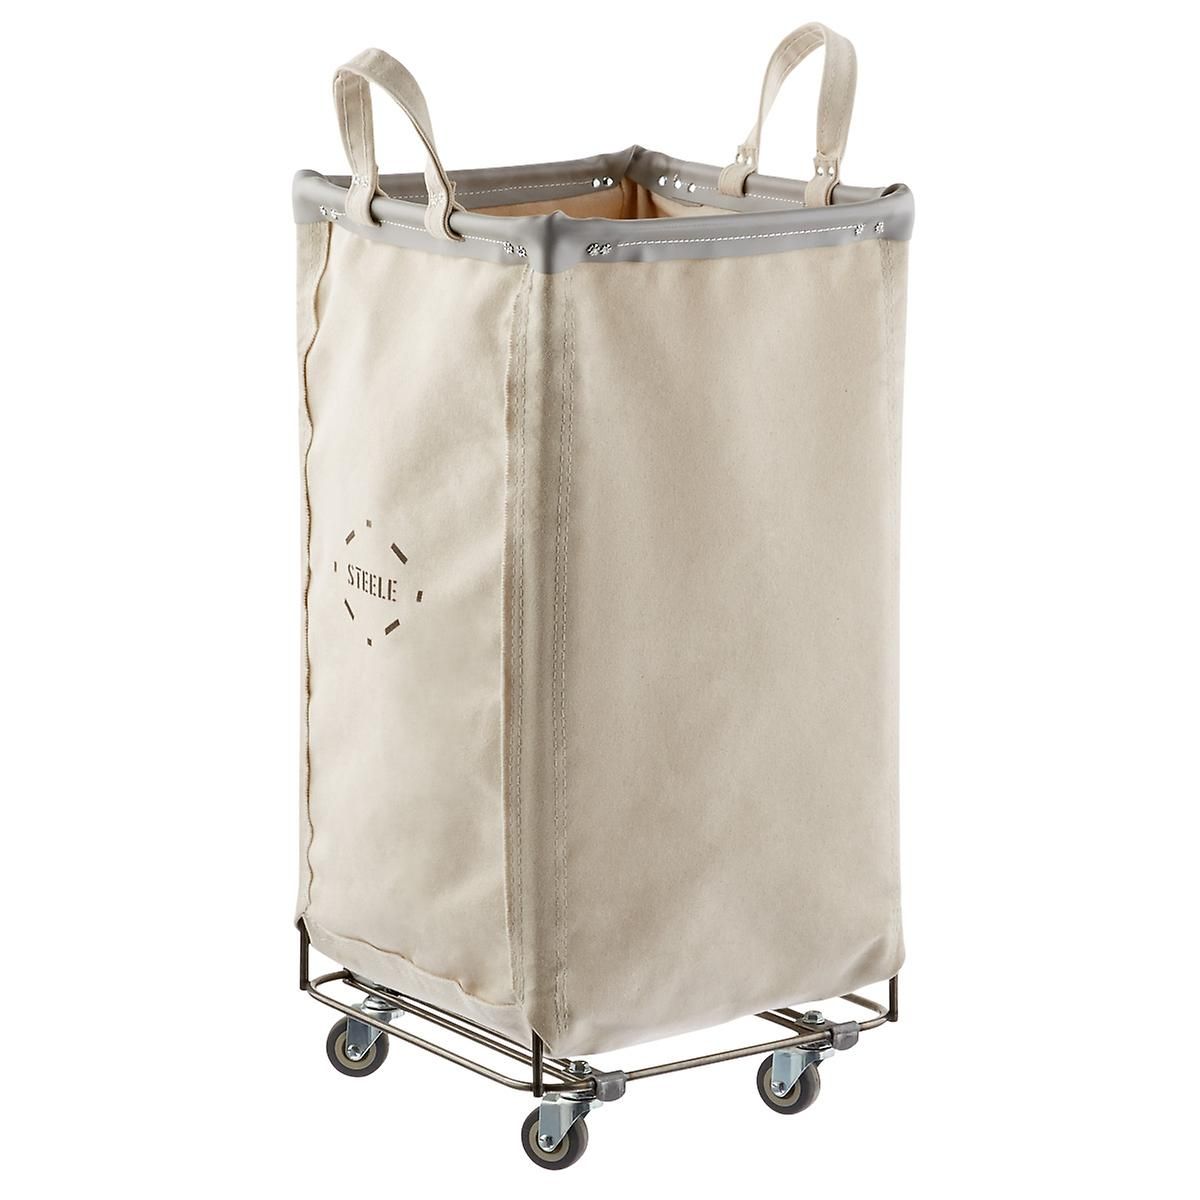 Steele Canvas Natural & Grey Squared Sorting Hamper | The Container Store